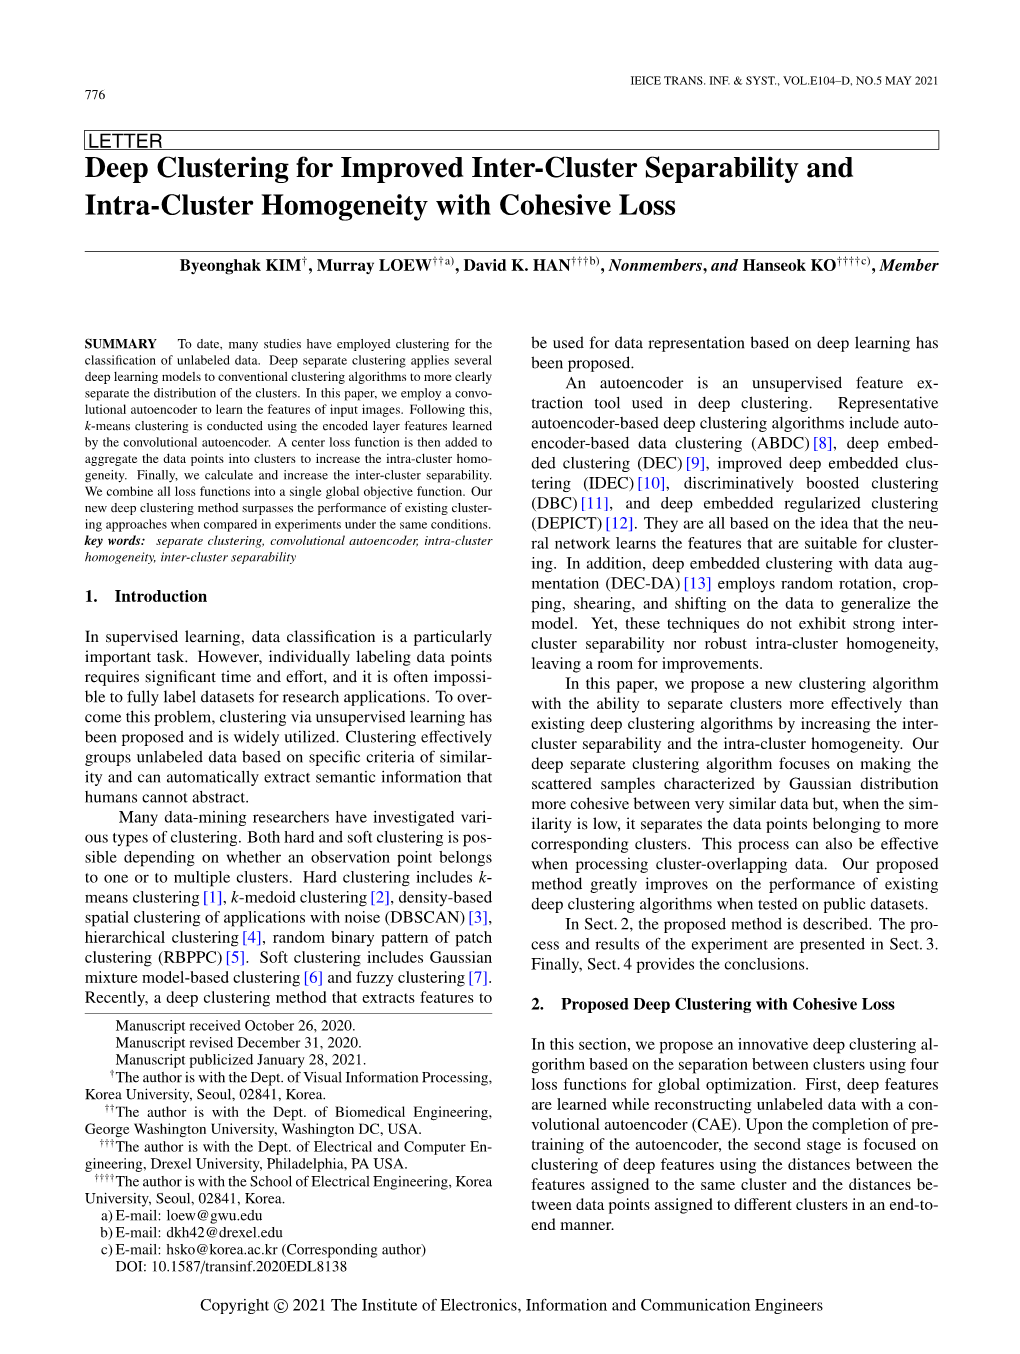 Deep Clustering for Improved Inter-Cluster Separability and Intra-Cluster Homogeneity with Cohesive Loss